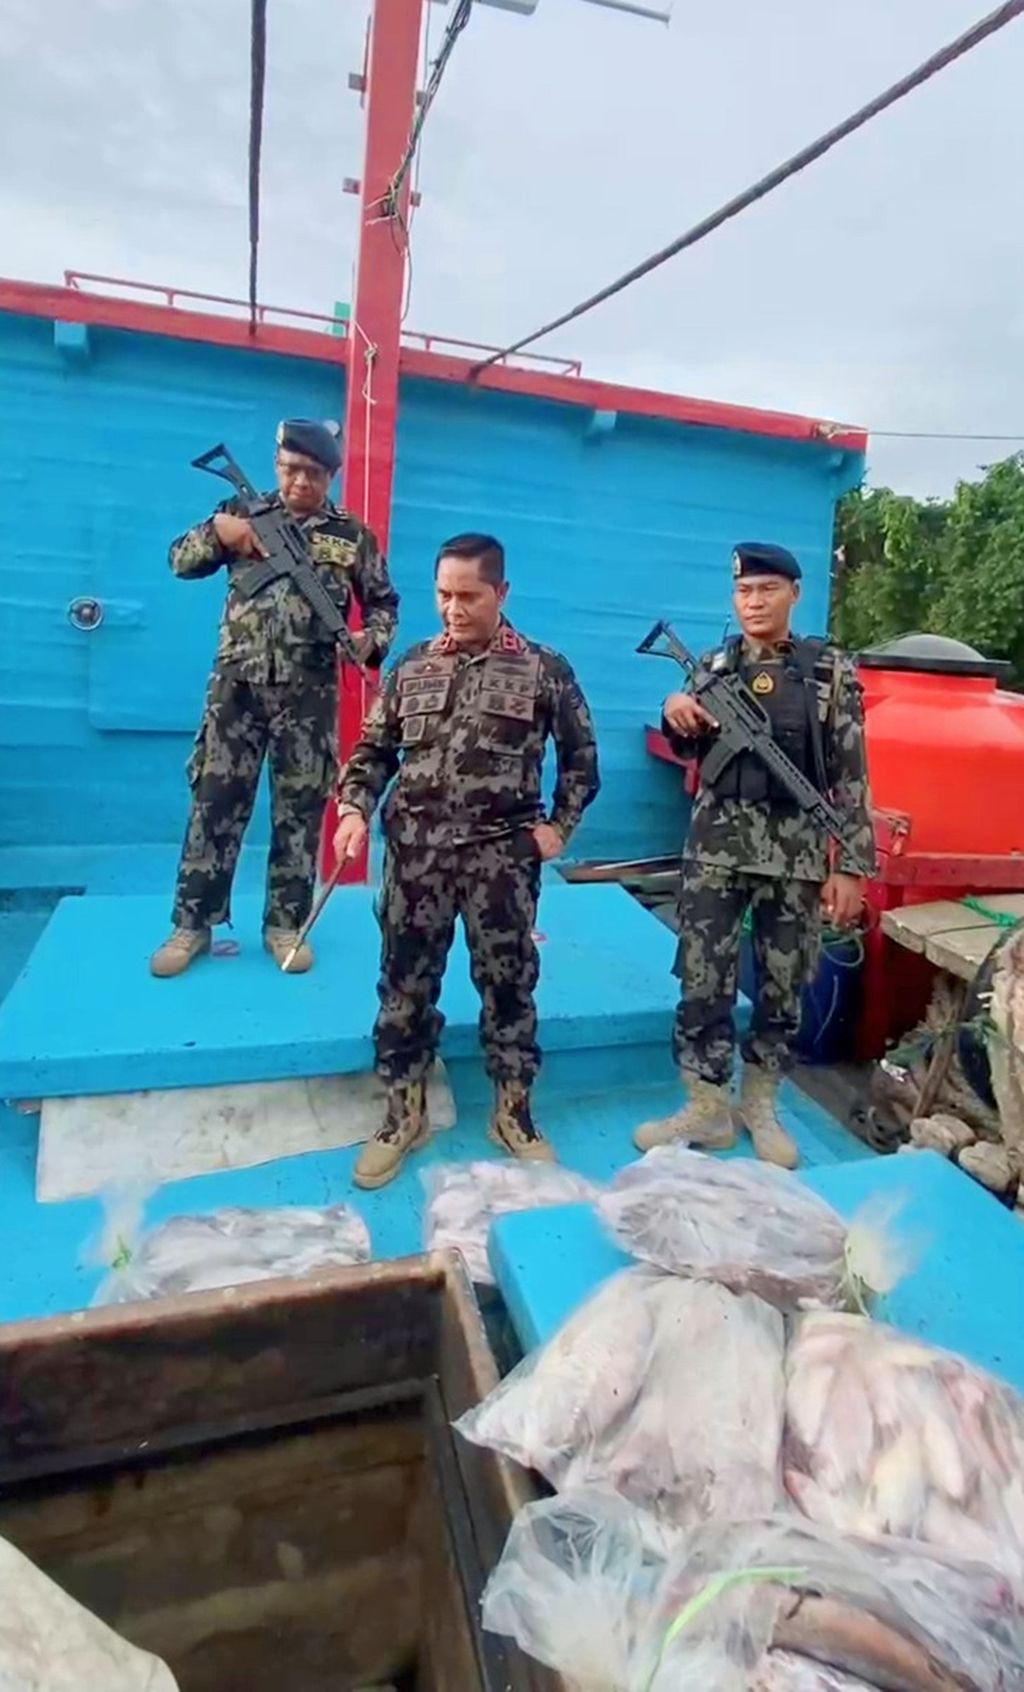 The Indonesian fish transport ship KM MUS was arrested by supervisory officers from the Ministry of Maritime Affairs and Fisheries, early April 14. The fish transport ship was involved in multidimensional crimes, namely transshipment of fish from foreign ships, smuggling fuel and human trafficking.